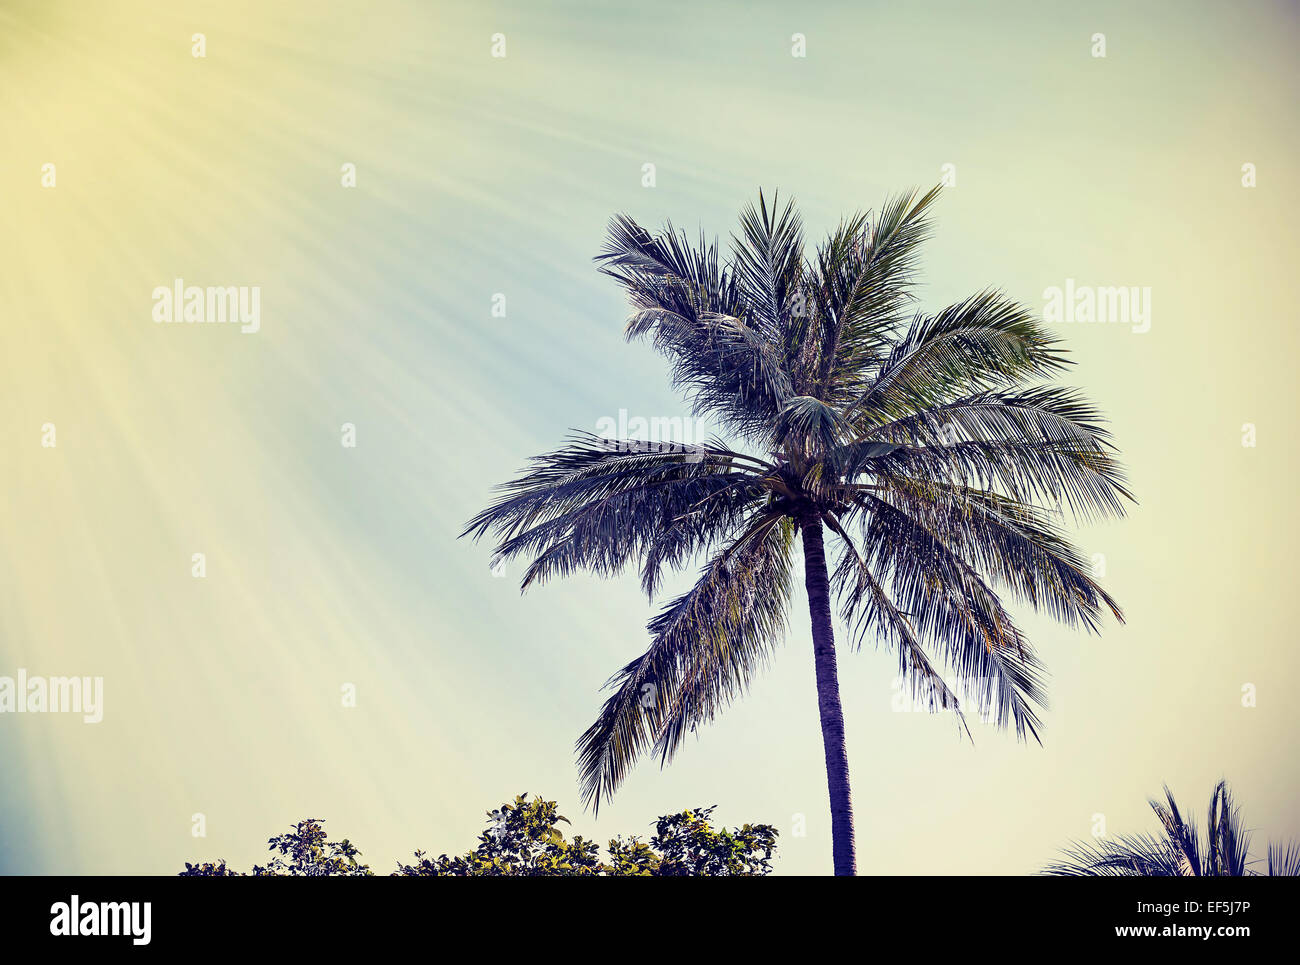 Faded vintage retro filtered palm background. Stock Photo